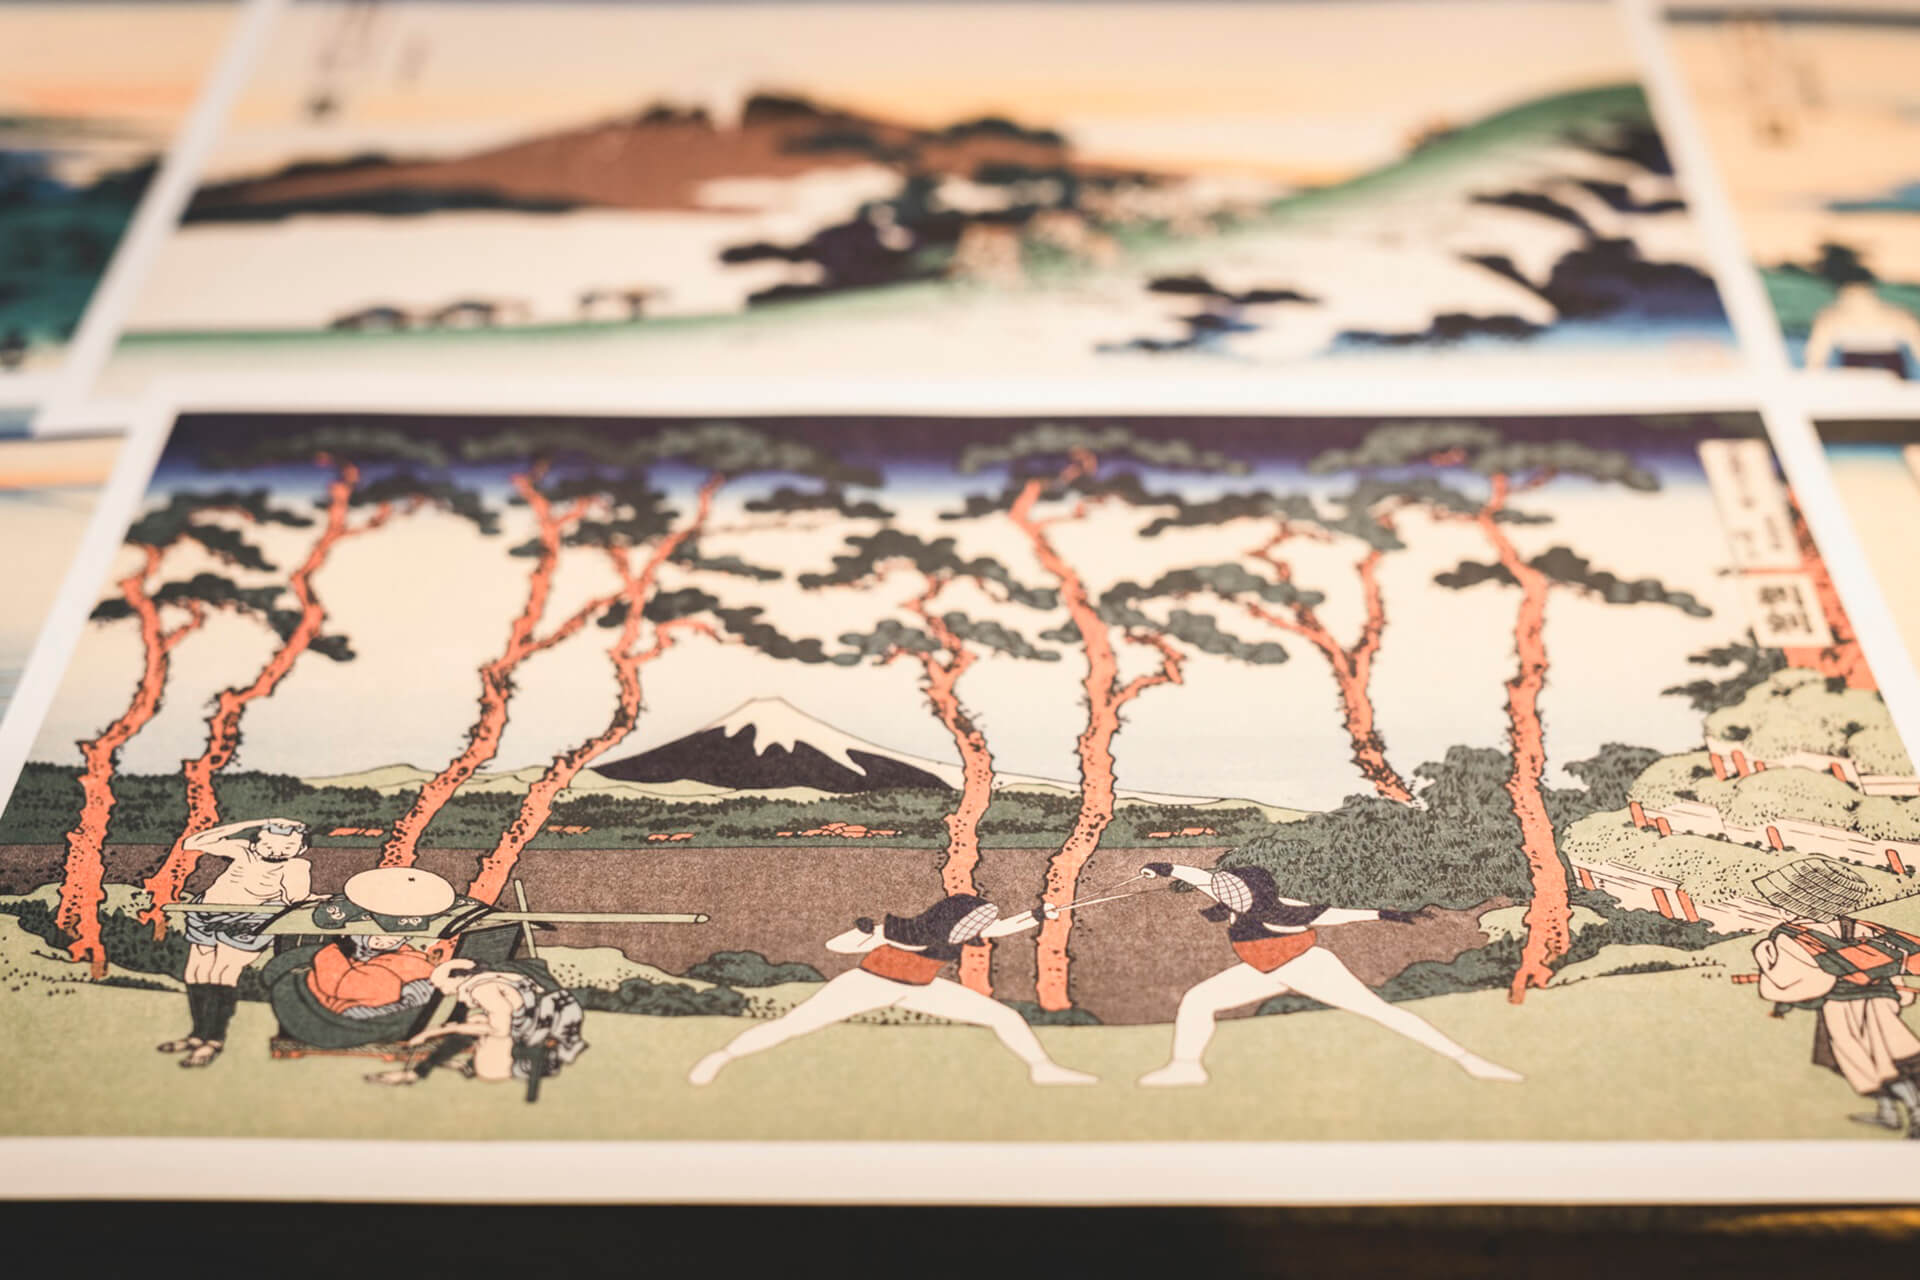 Another custom-made ukiyo-e; this one illustrates fencing